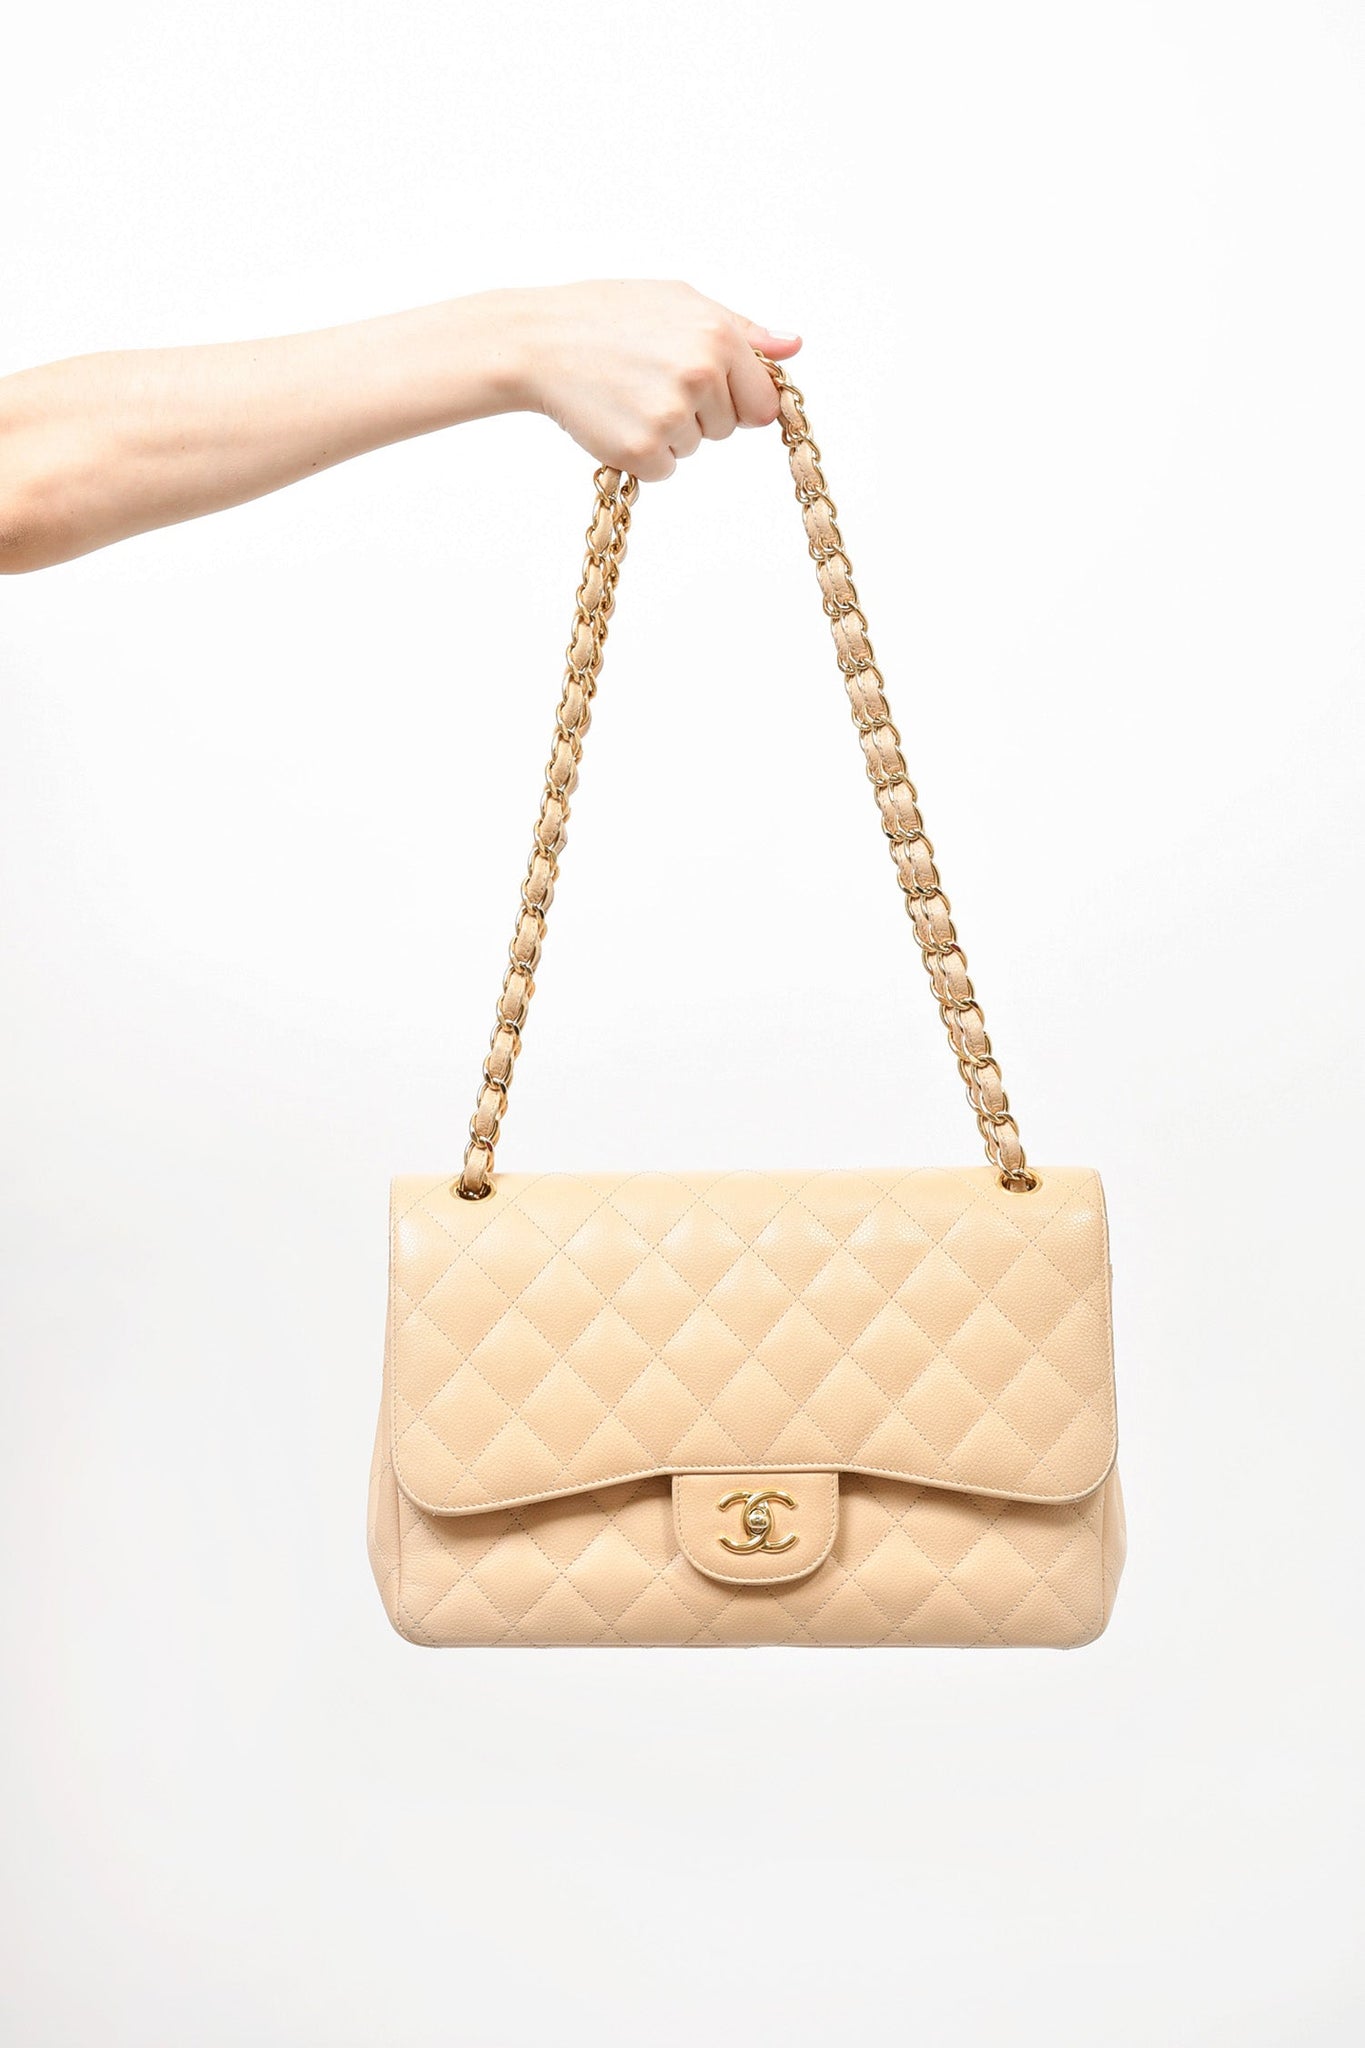 💯% Authentic Chanel Beige Caviar Quilted Jumbo Double Flap Bag with GHW